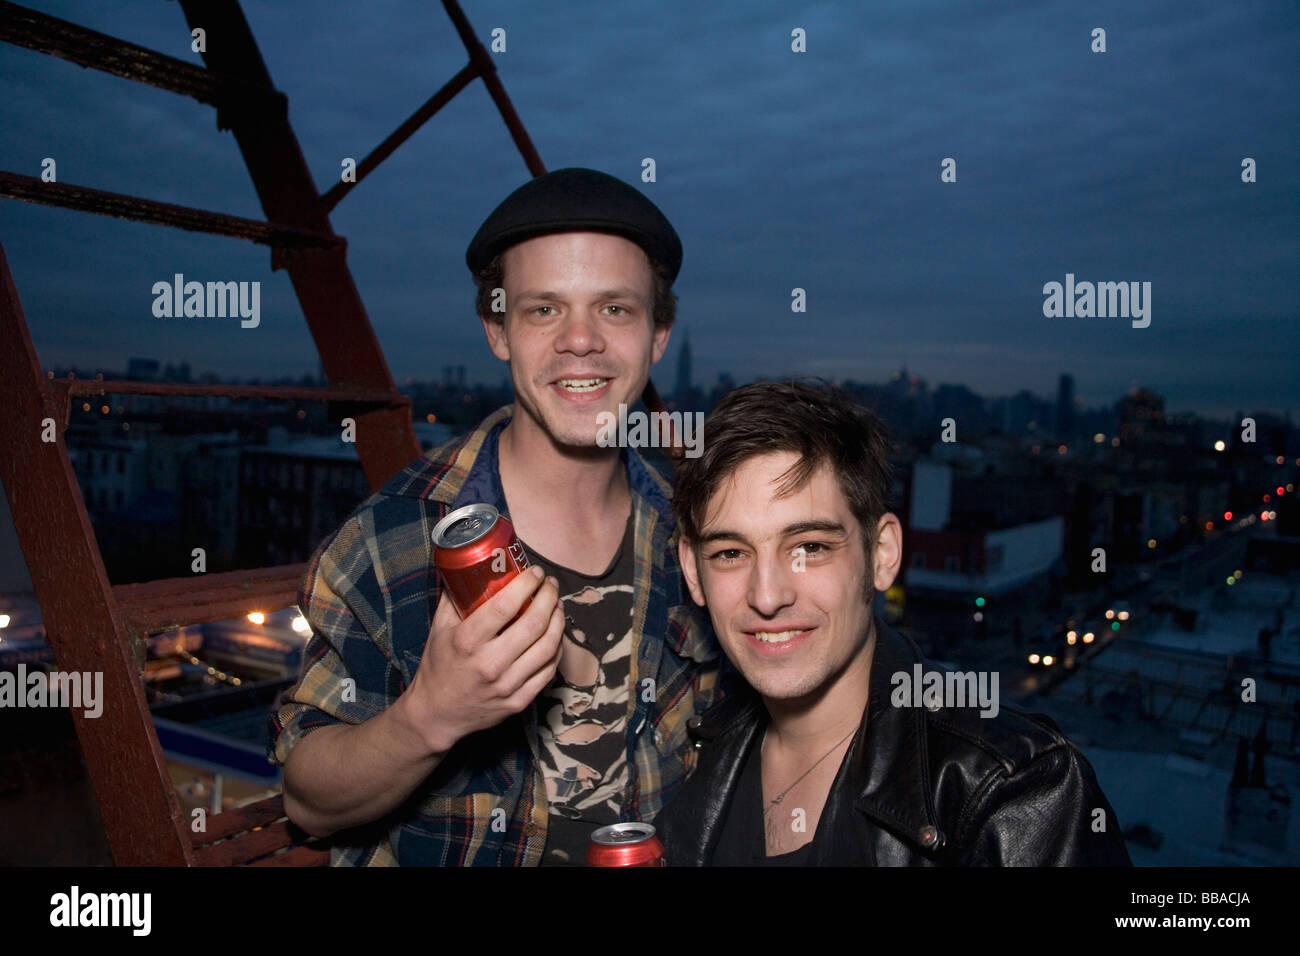 Two young men standing on a fire escape at night Stock Photo